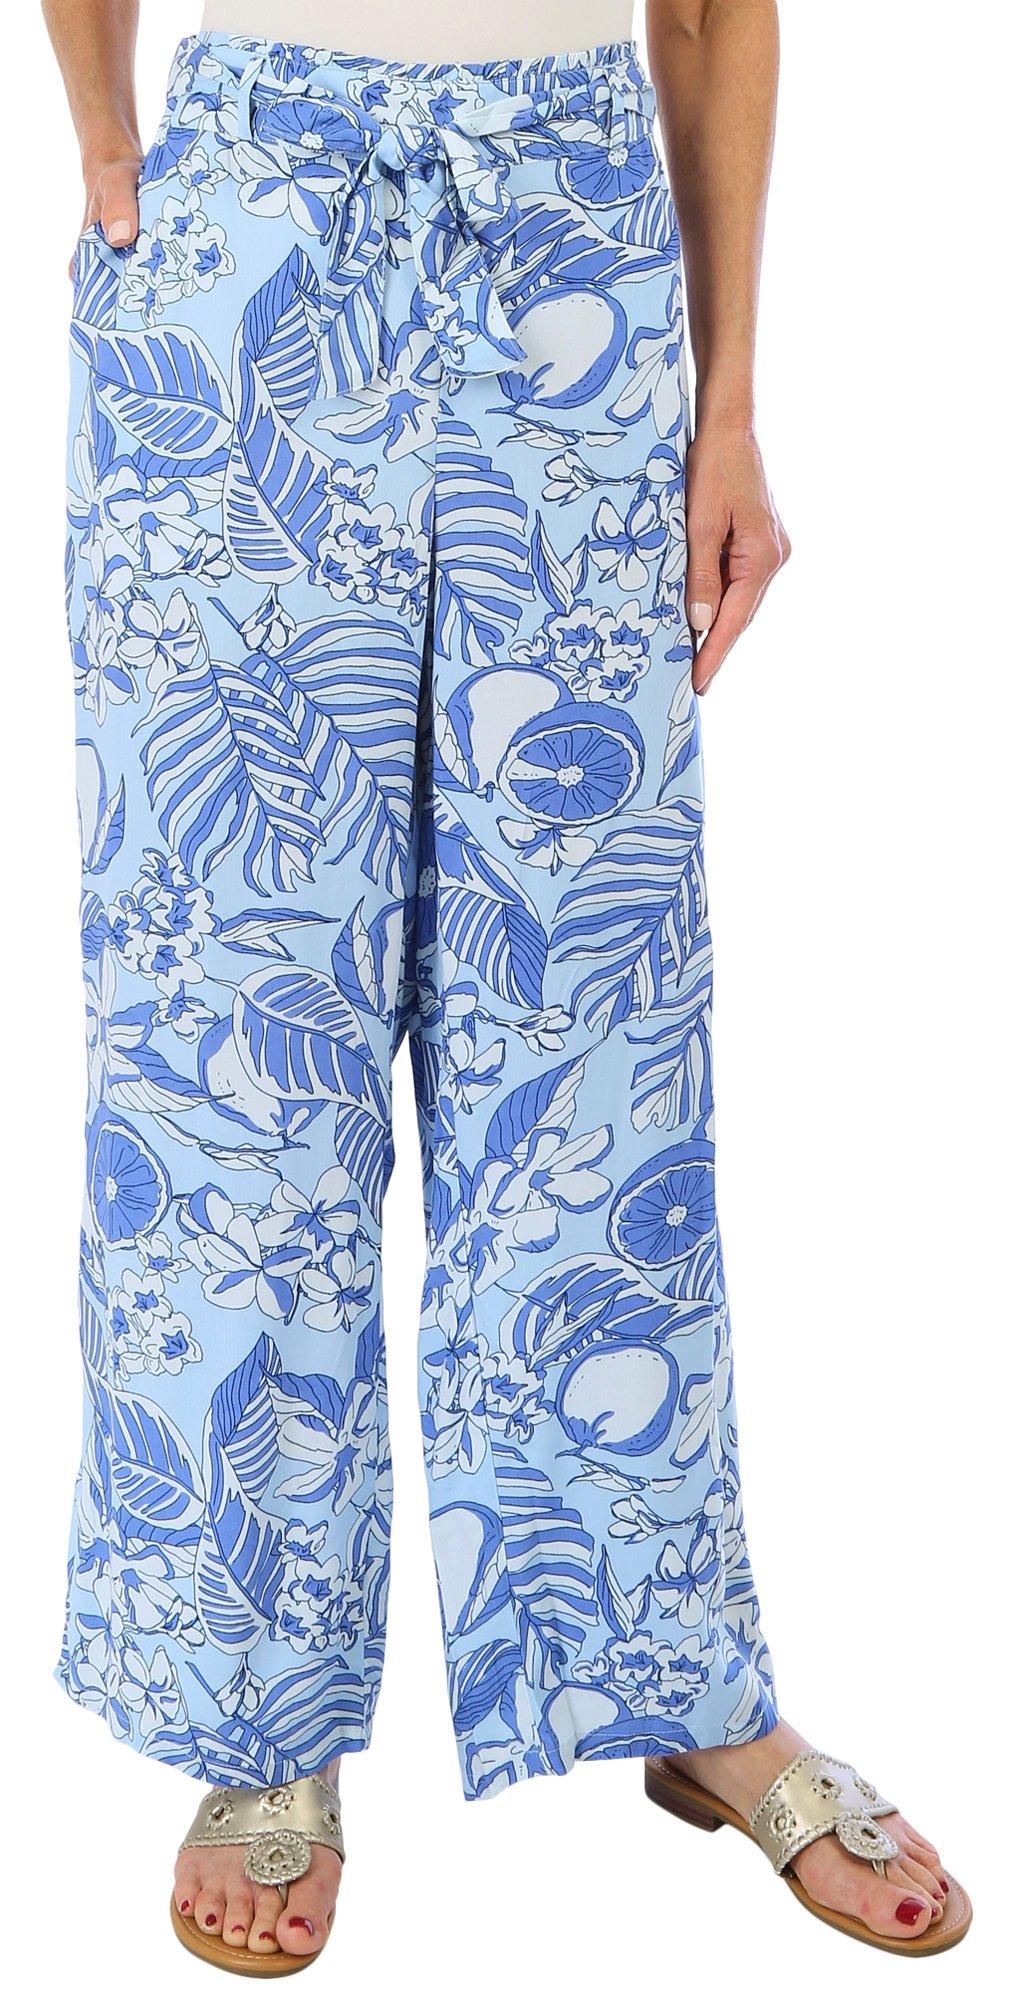 Womens Wide Leg Pull On Floral Print Pants